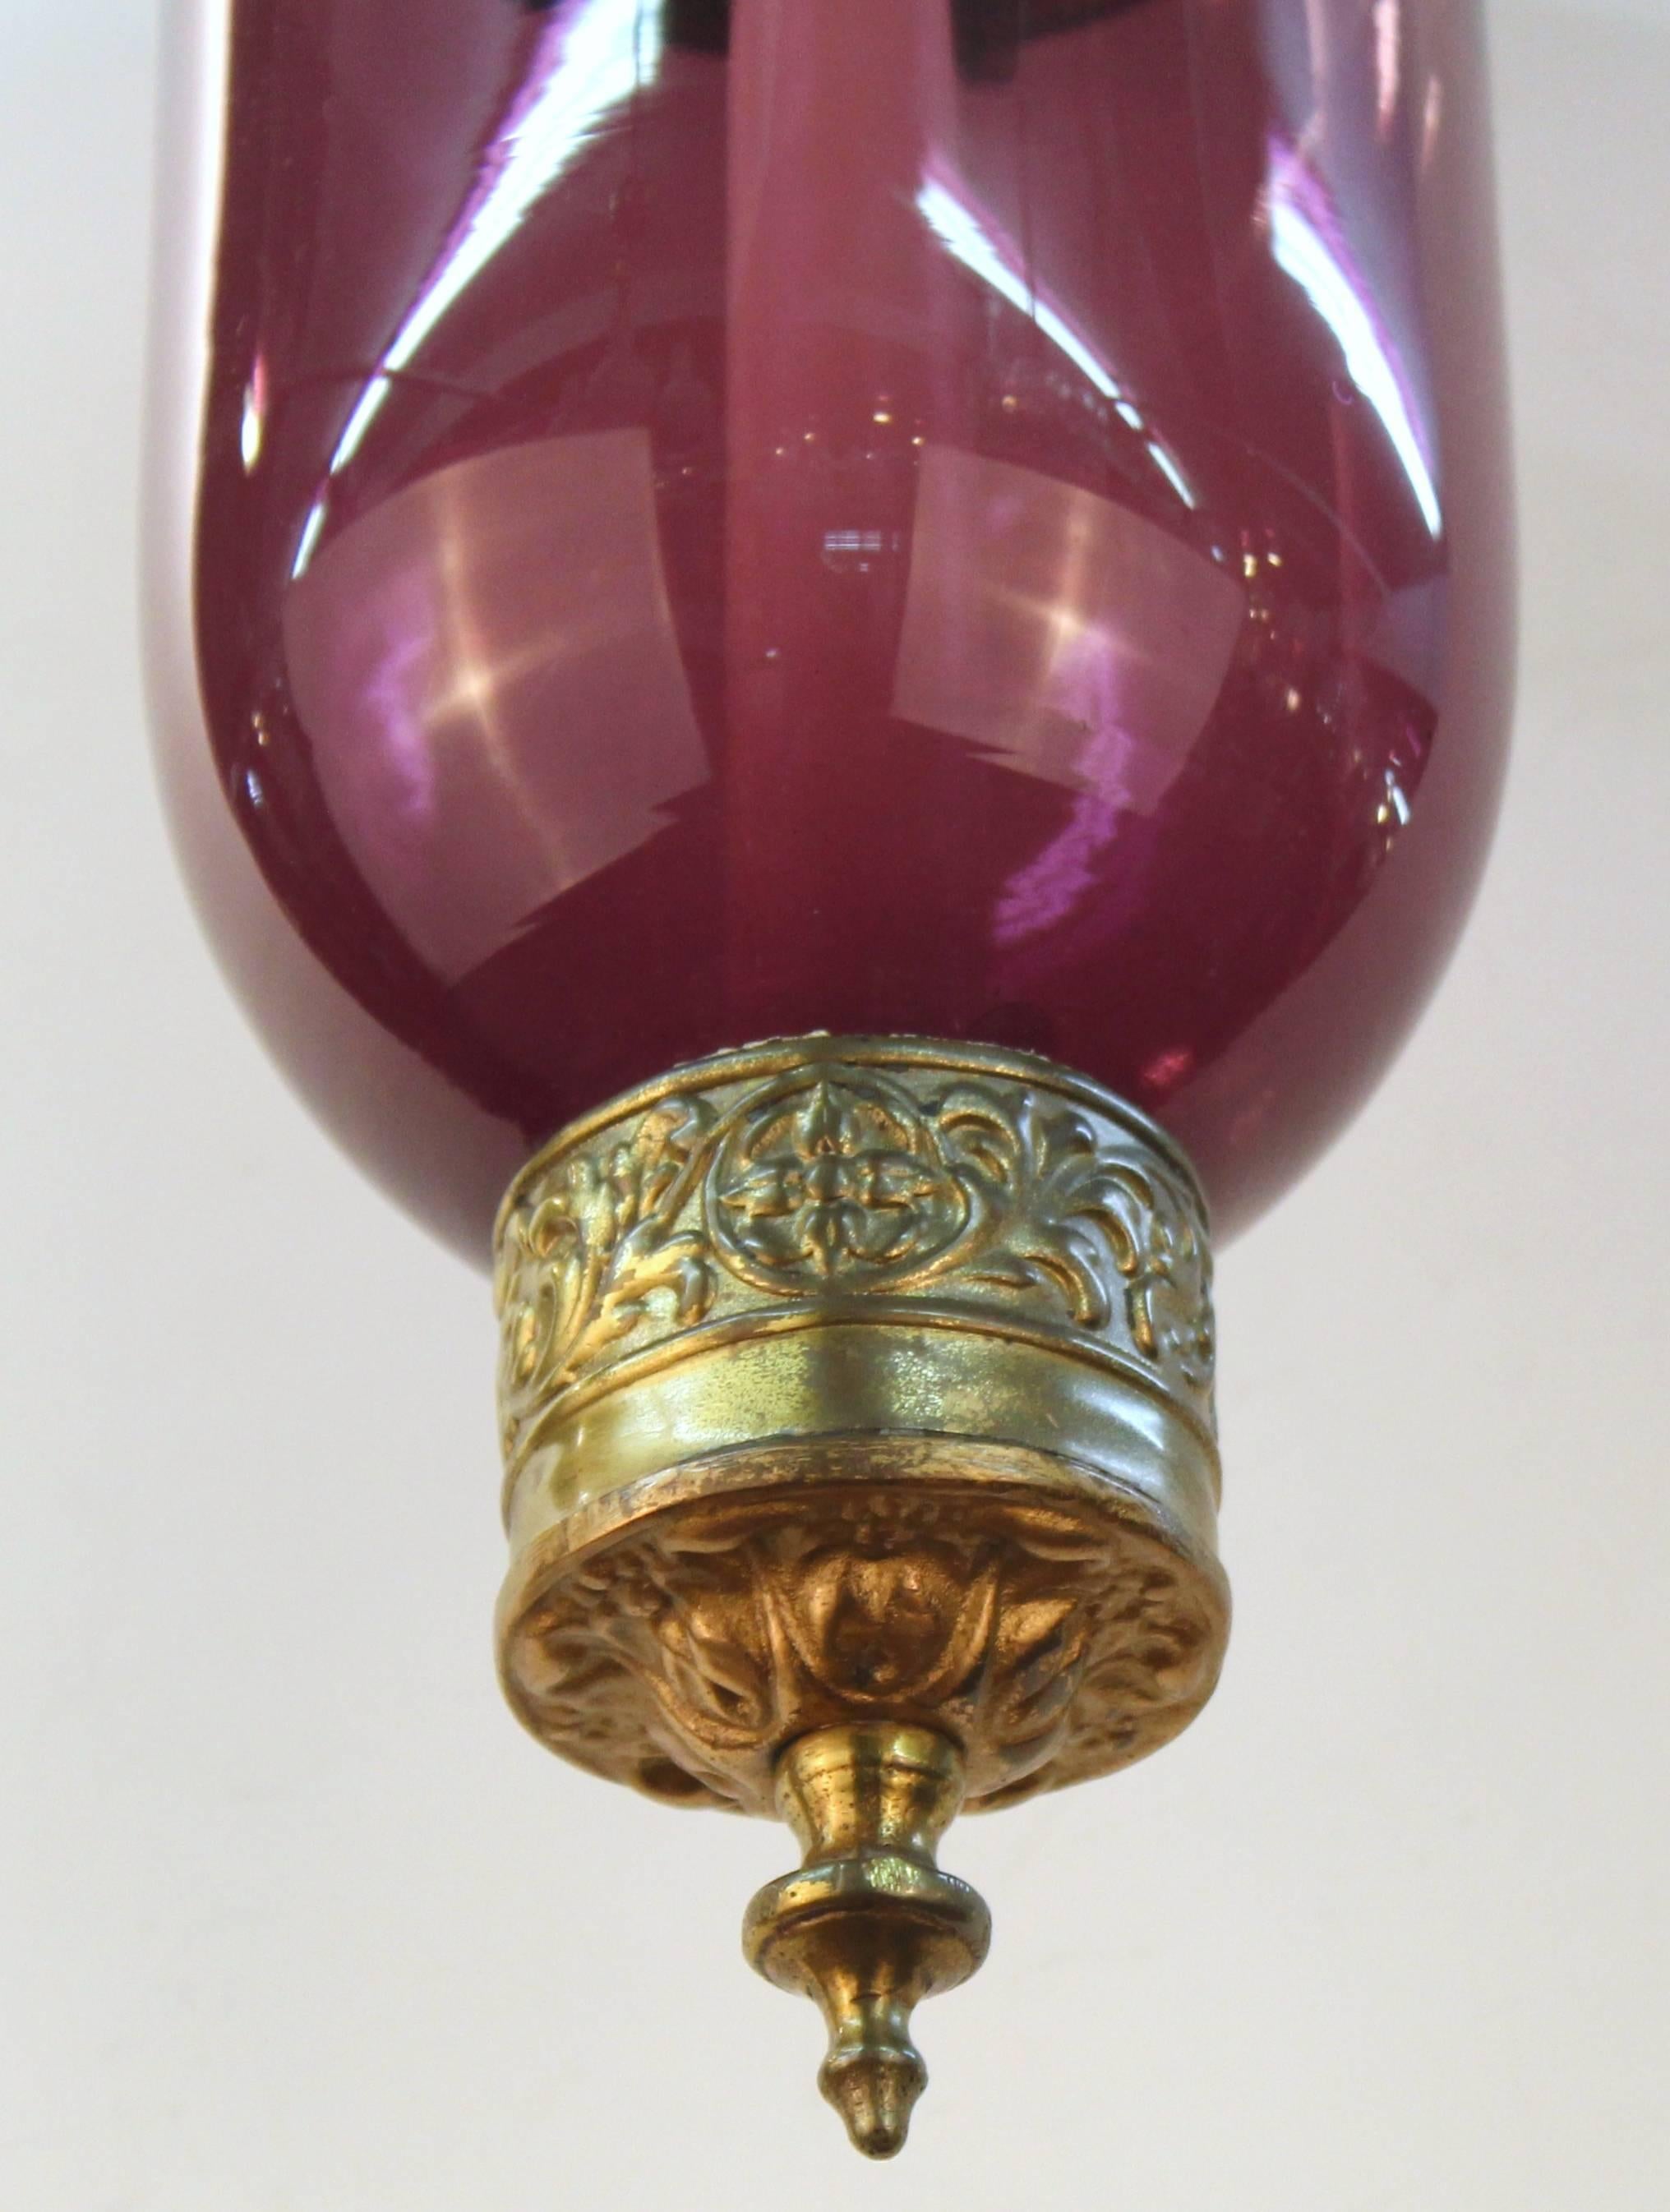 English Regency bell jar lanterns in amethyst colored glass with brass accents featuring a swan motif. Each of these lanterns has not been electrified and features a blown glass ceiling cap. These lanterns are in excellent vintage condition and have